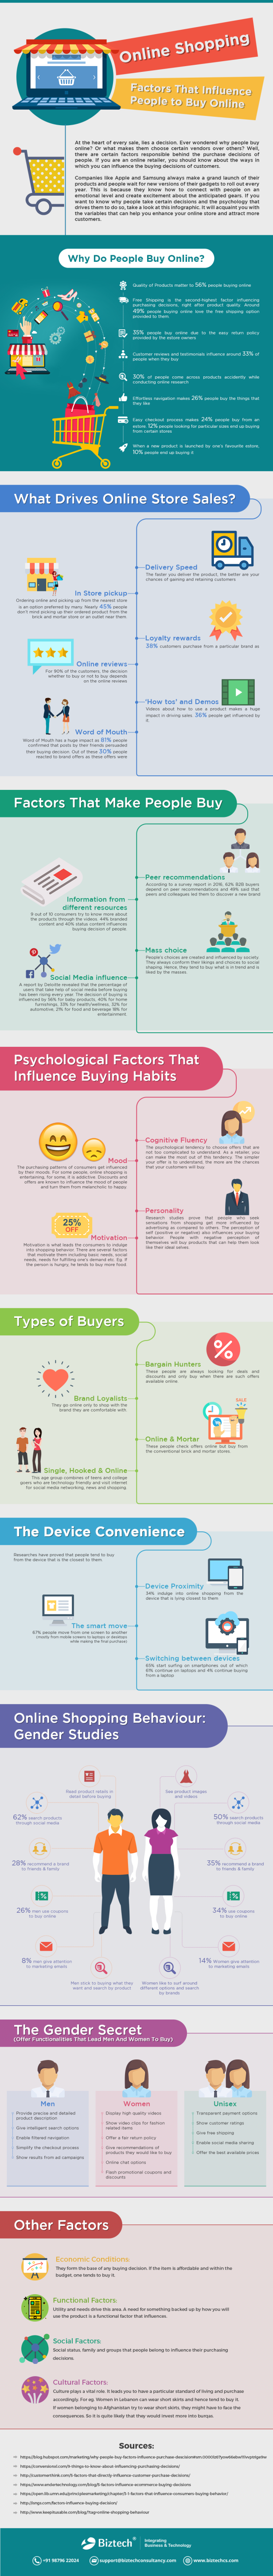 Online-Shopping_-Factors-That-Influence-People-To-Buy-Online